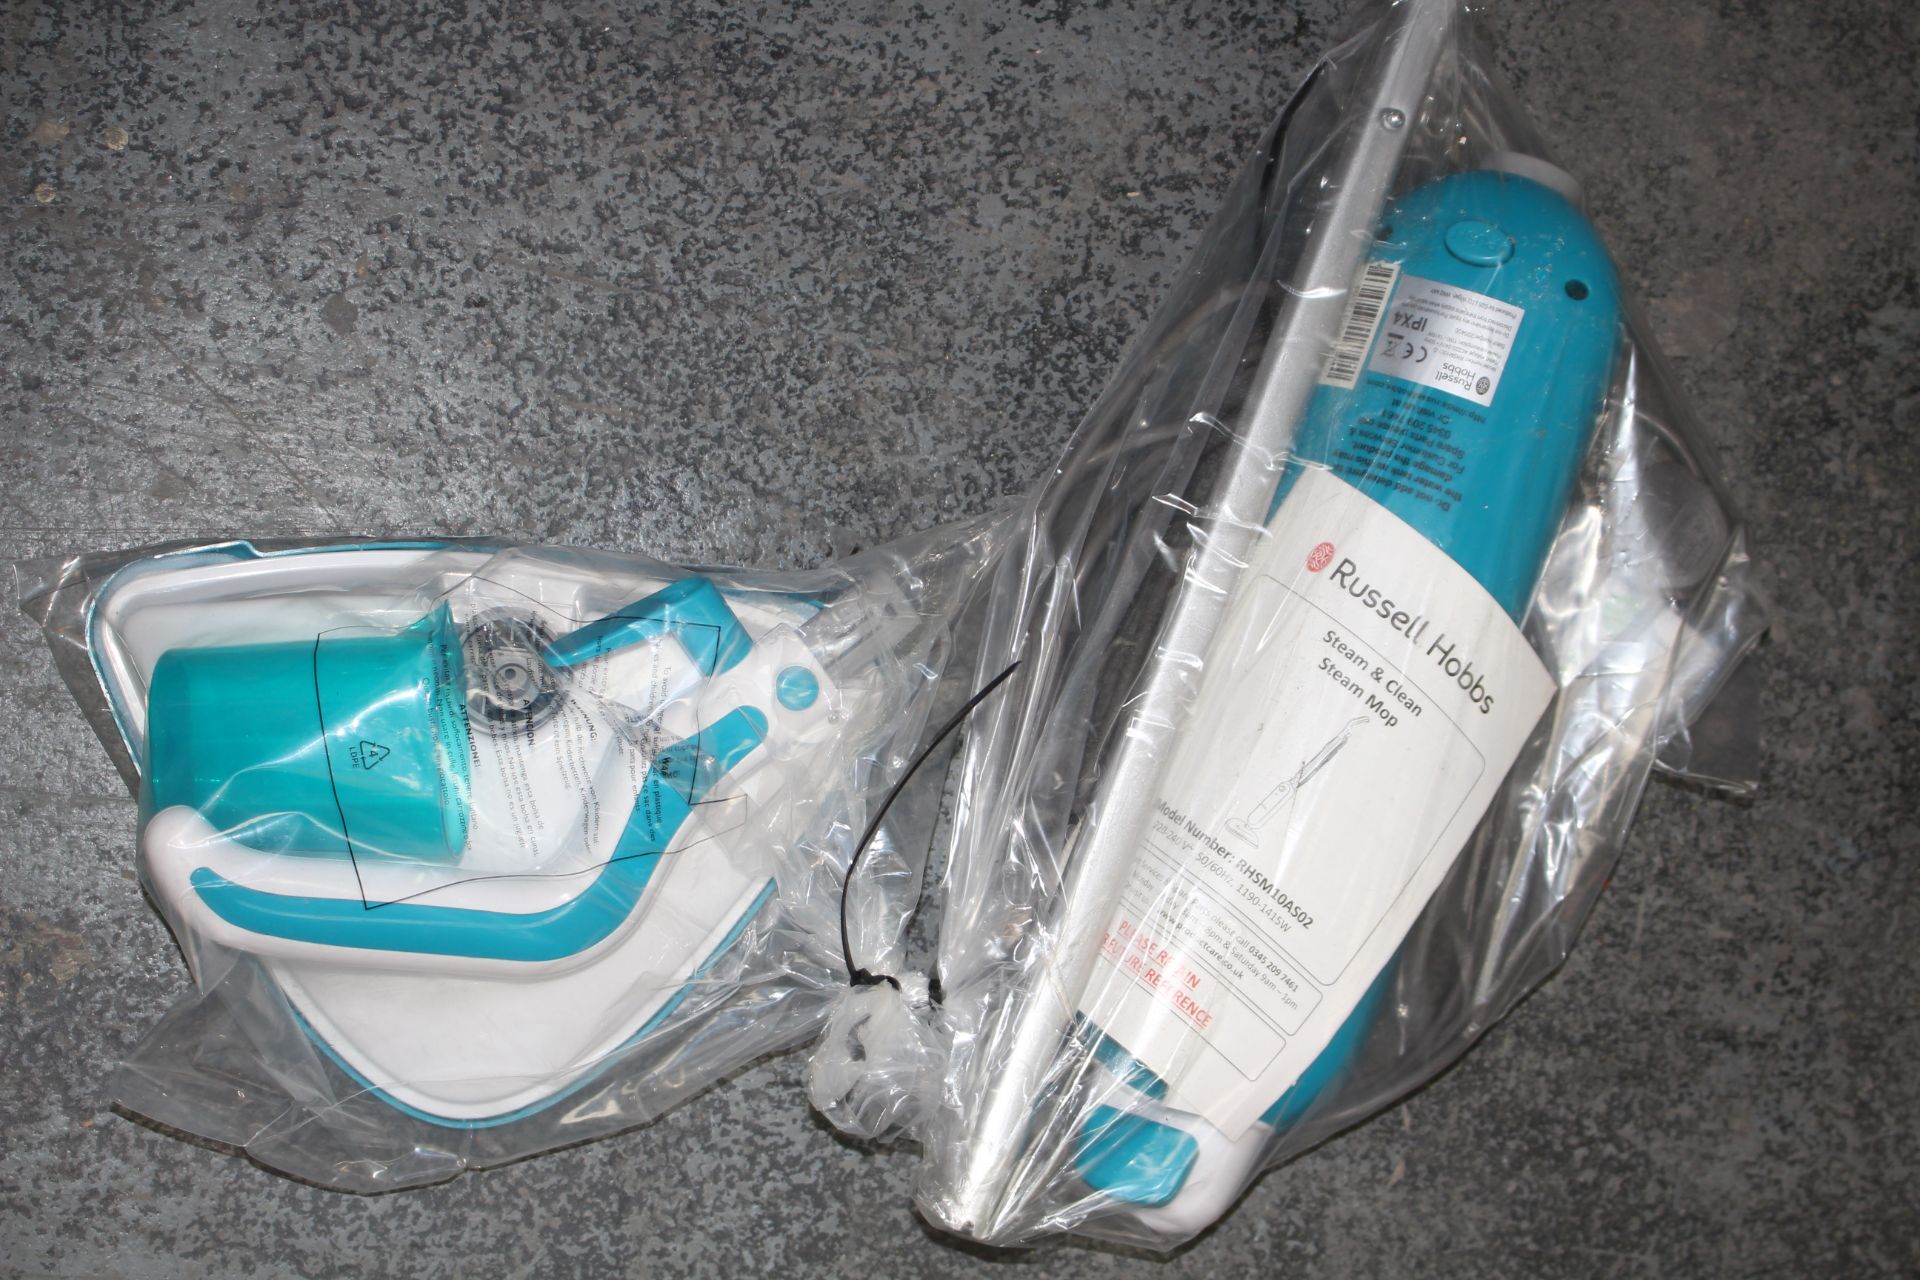 UNBOXED RUSSELL HOBBS STEAM & CLEAN STEAM MOP RRP £49.99Condition ReportAppraisal Available on